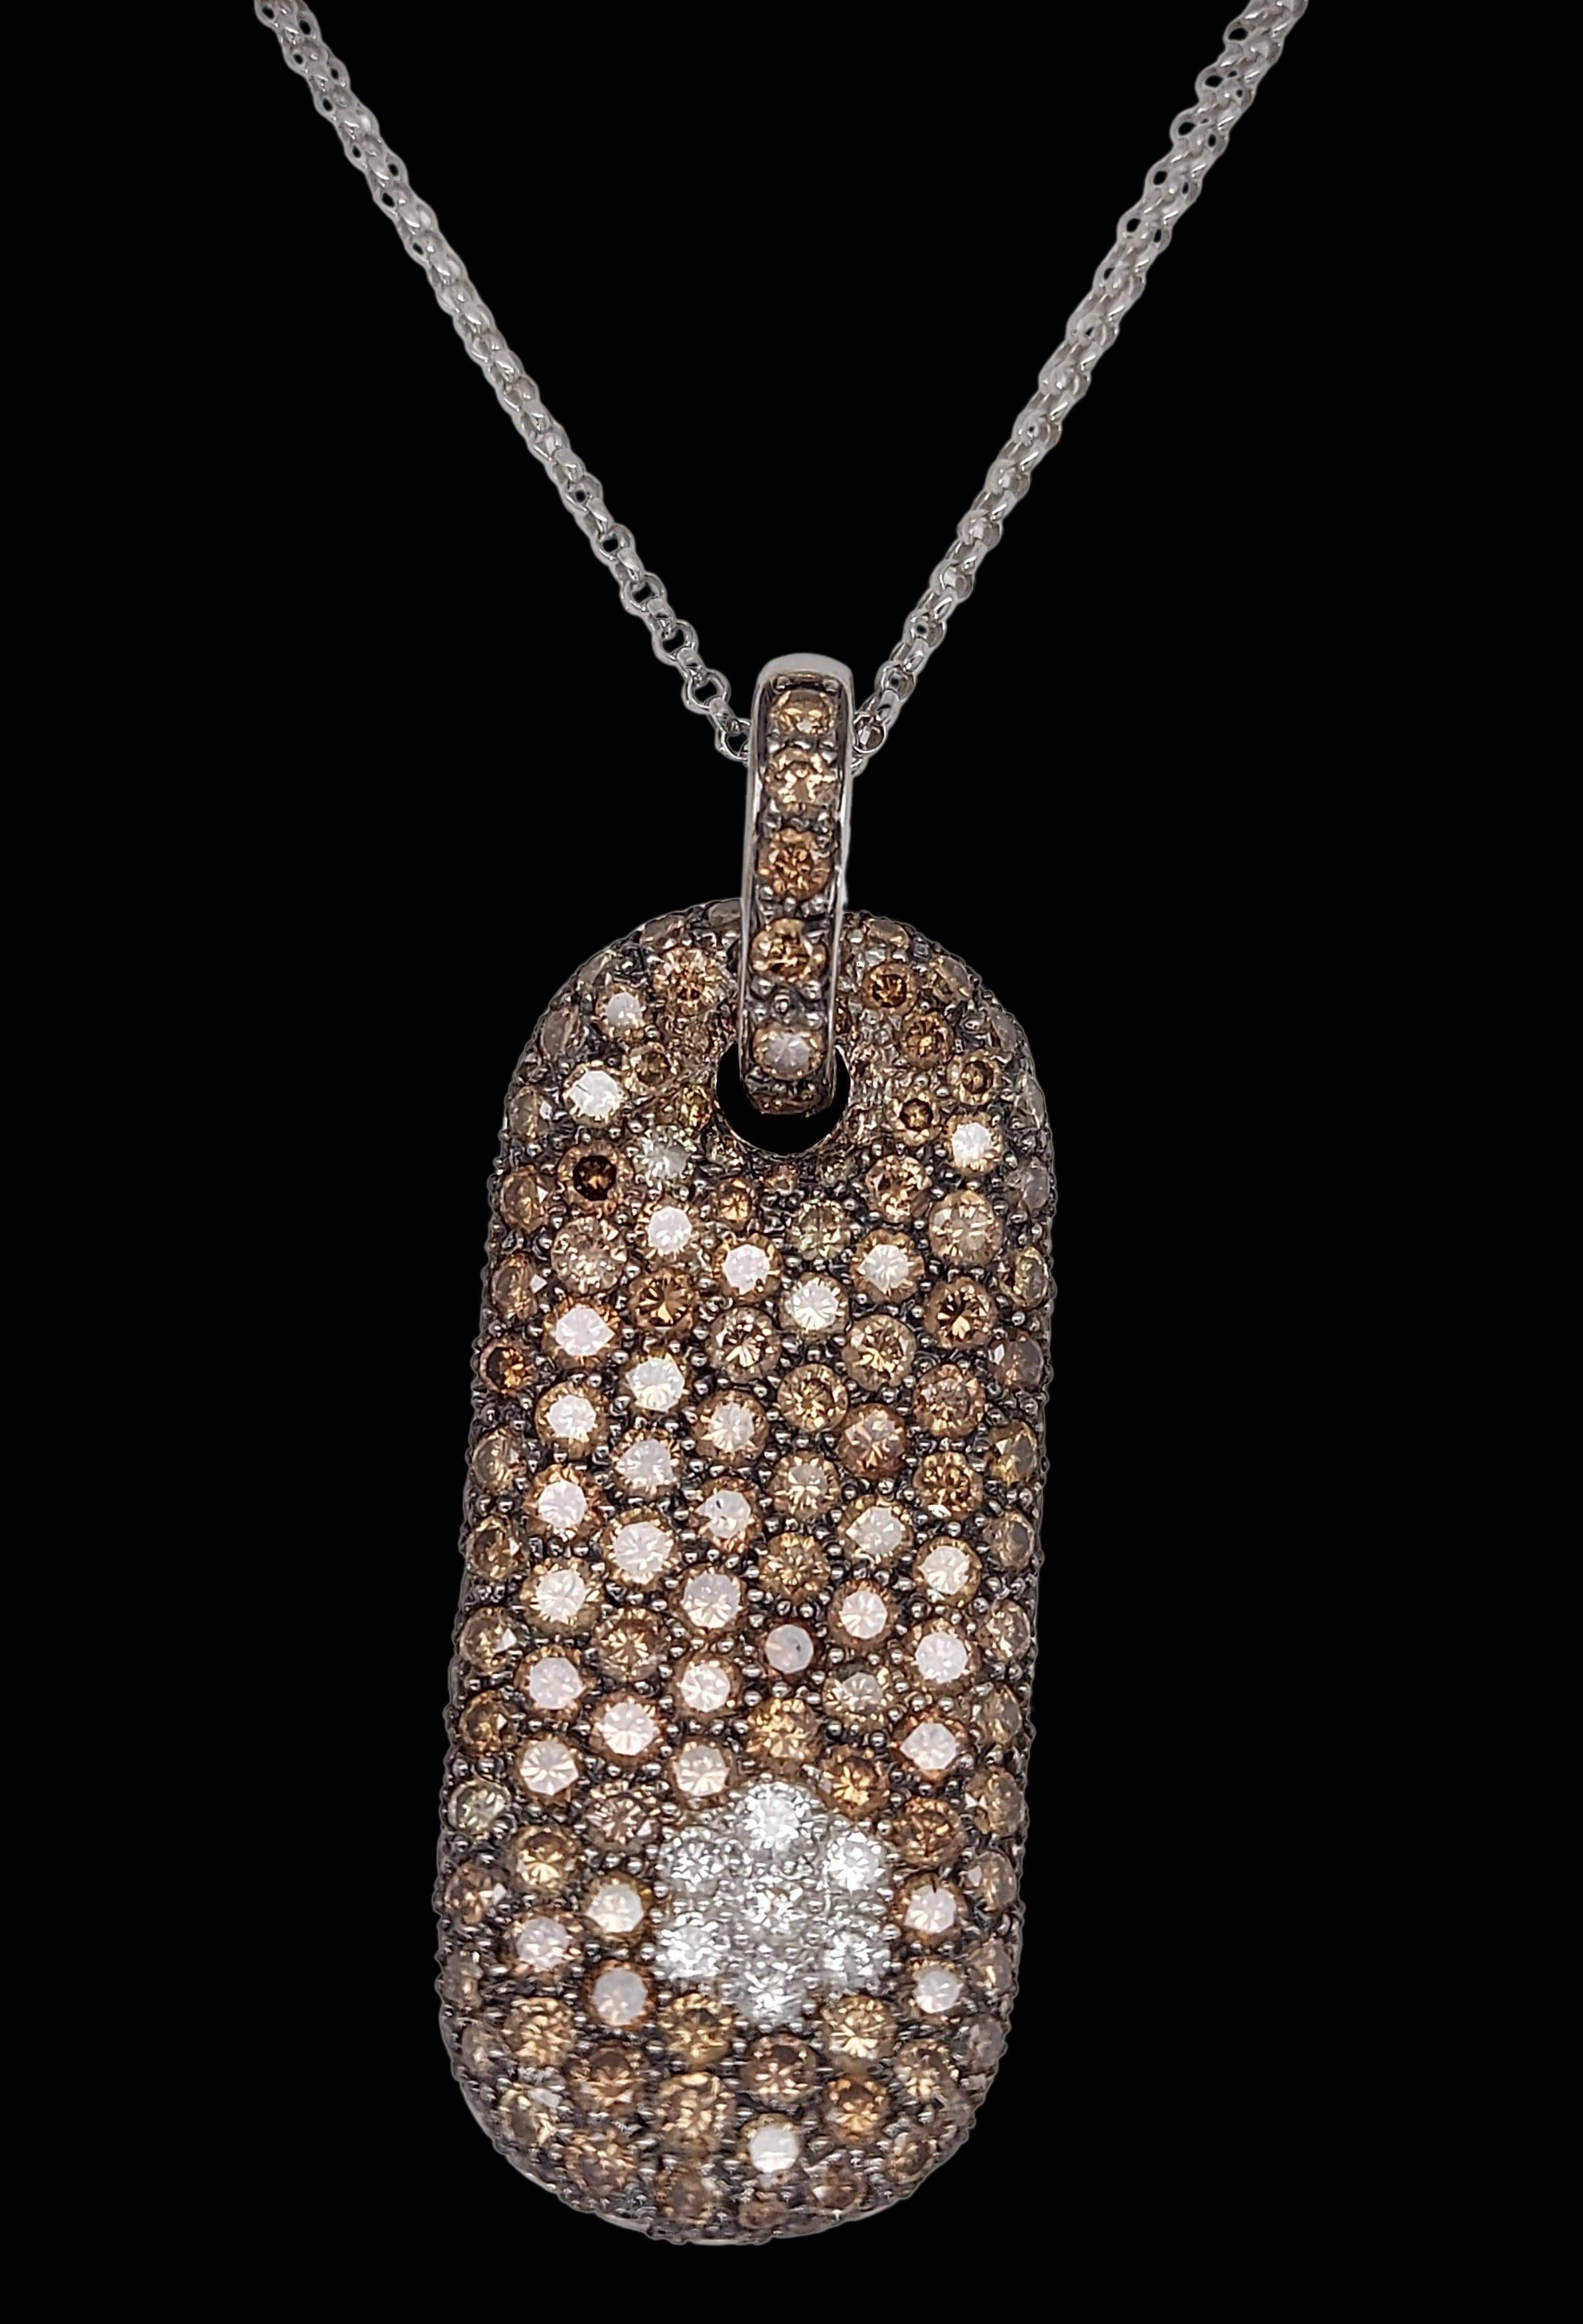 Very special 18Kt White Gold Pendant, Necklace With 0.28ct White & 6ct Brown Diamonds

Diamonds: Brilliant cut brown diamonds circa 6ct, brilliant cut  white diamonds 0.28ct.

Material: 18kt white gold

Total weight: 8.9 grams / 5.8 dwt / 0.315